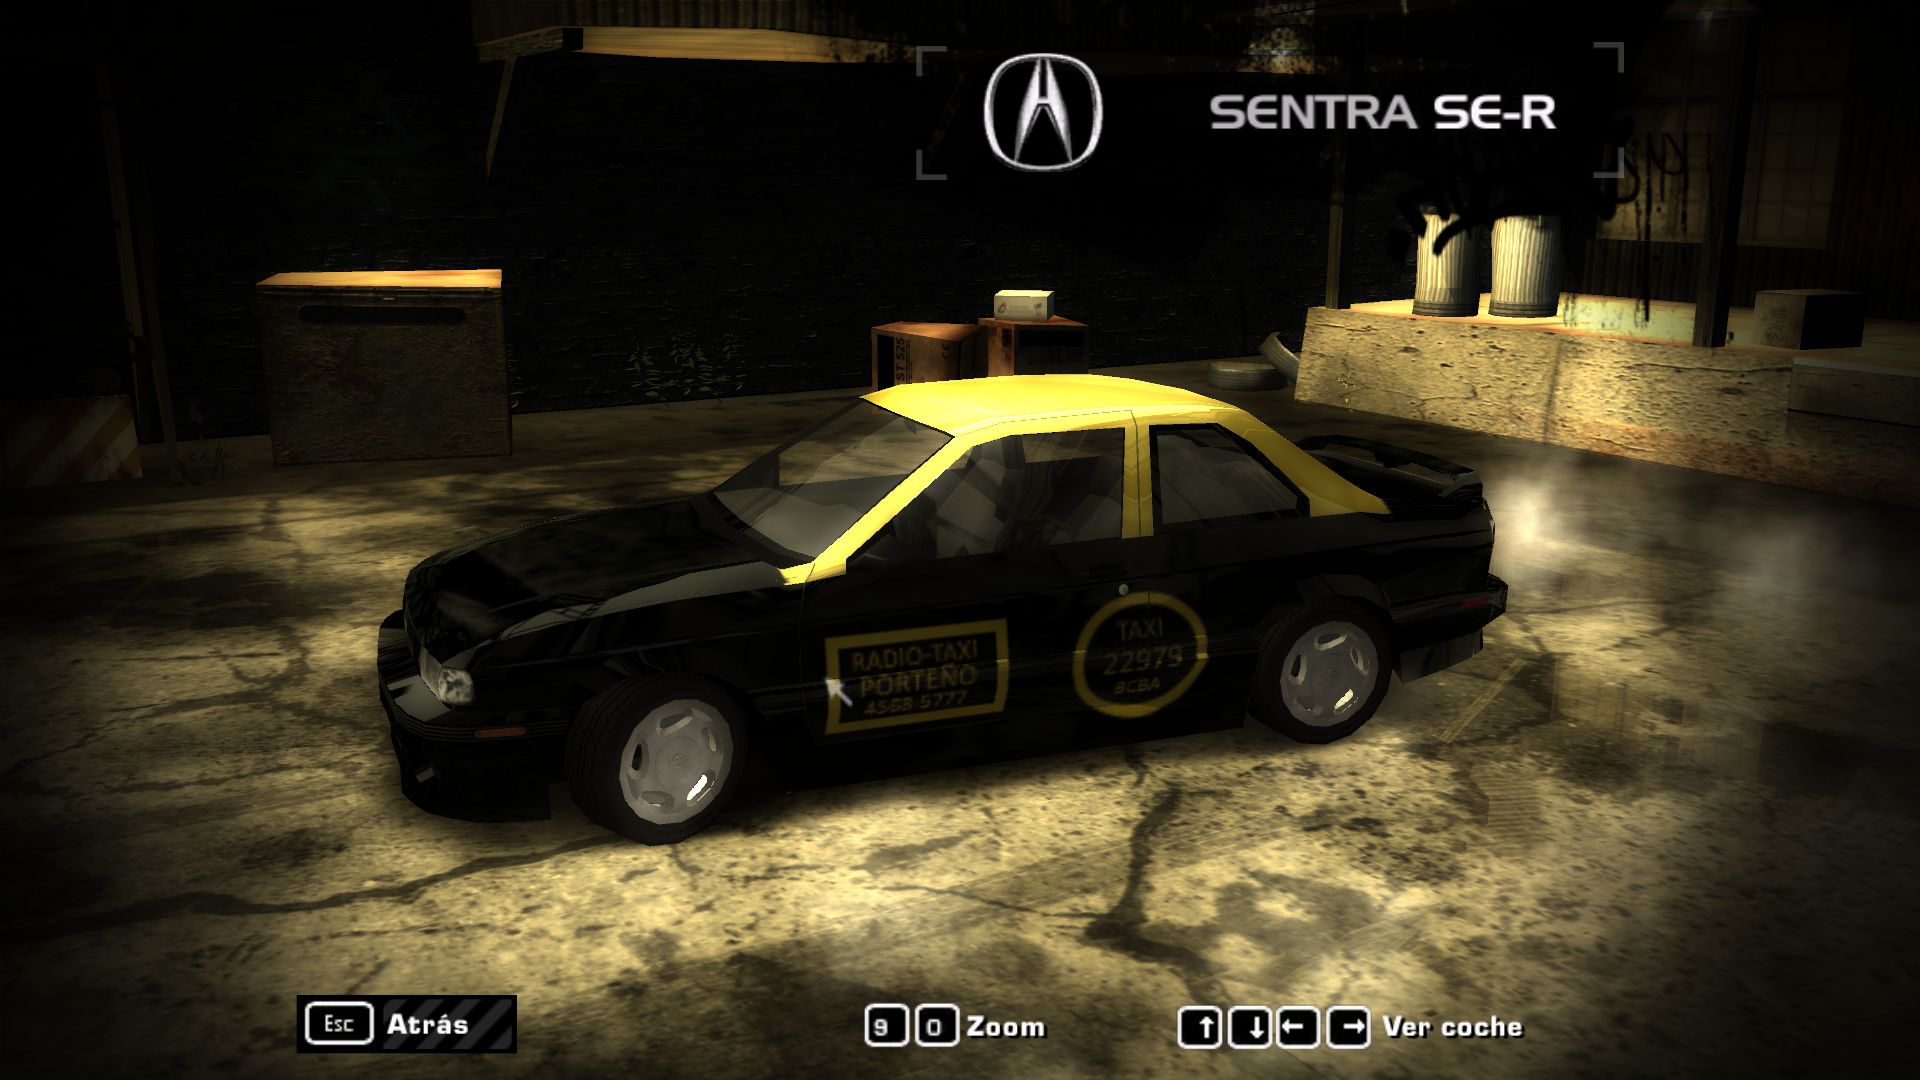 Need For Speed Most Wanted Nissan Sentra SE-R + Vinilo Taxi Mexico y argentina